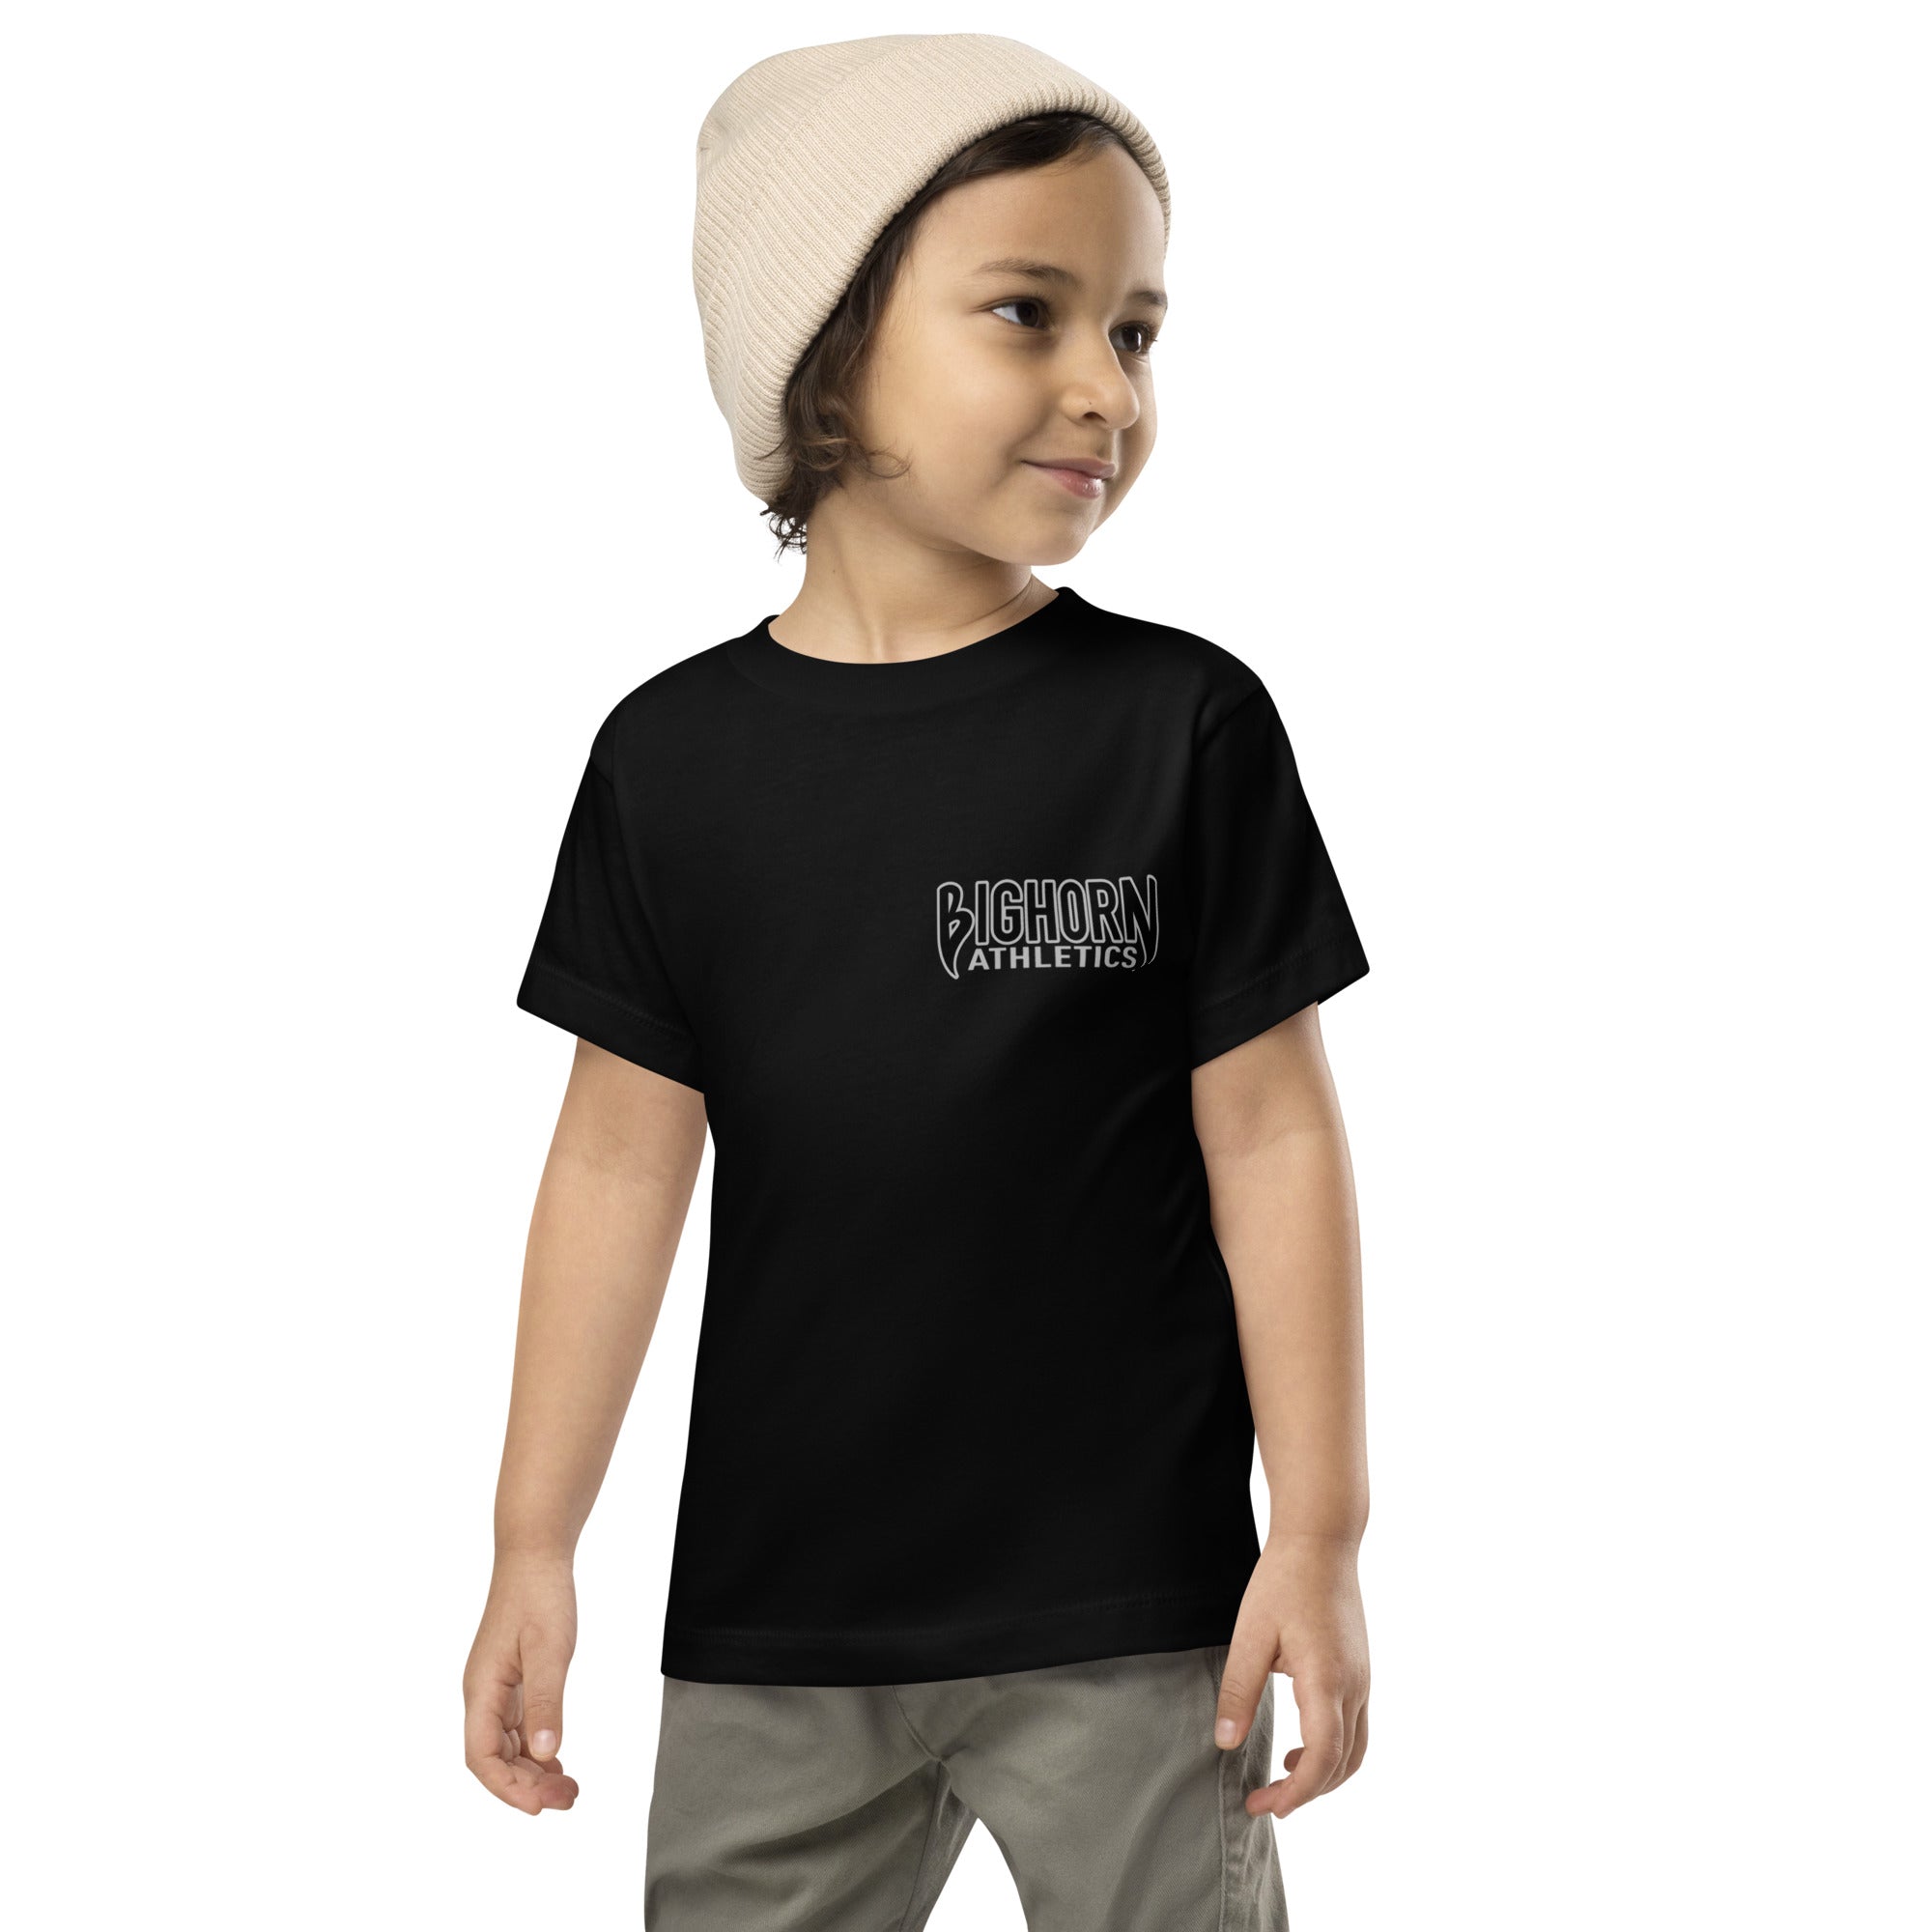 "The Classic" Toddler Short Sleeve Tee